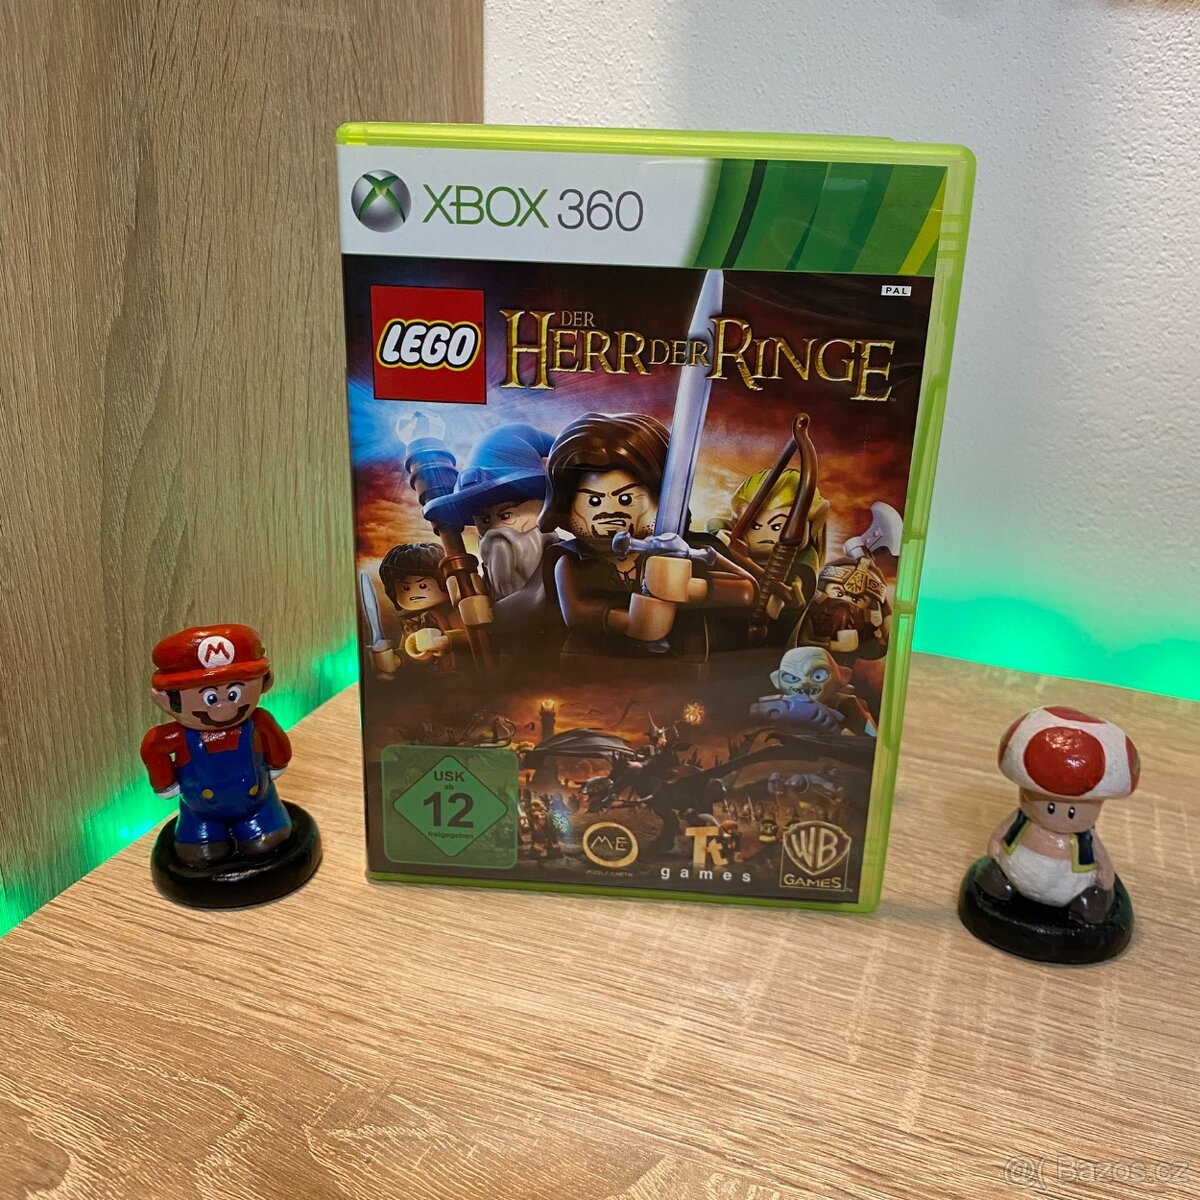 Lego Lord of the Rings (DE) - XBOX 360